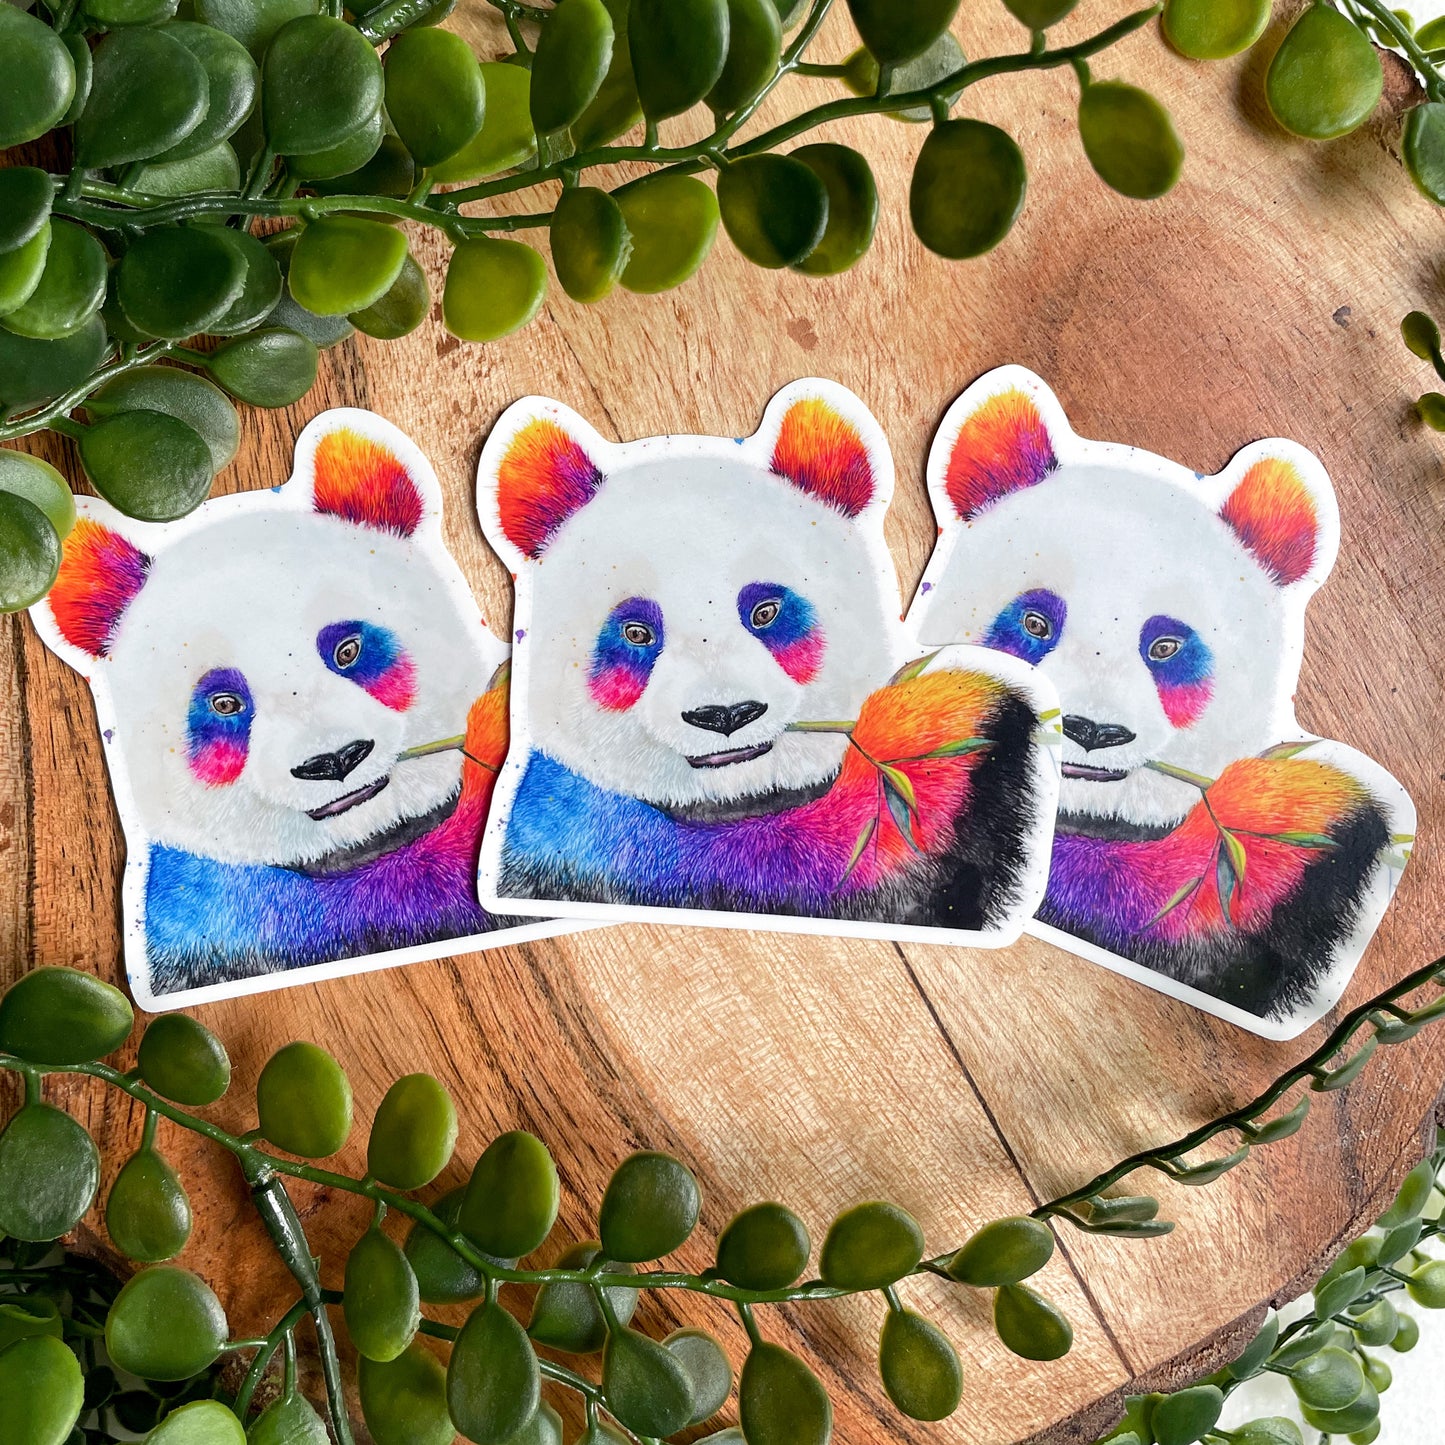 A close-up image of the waterproof, vinyl, dye-cut sticker depicting a watercolor painting from the Wild Planet Creations wild animal collection of a giant panda.